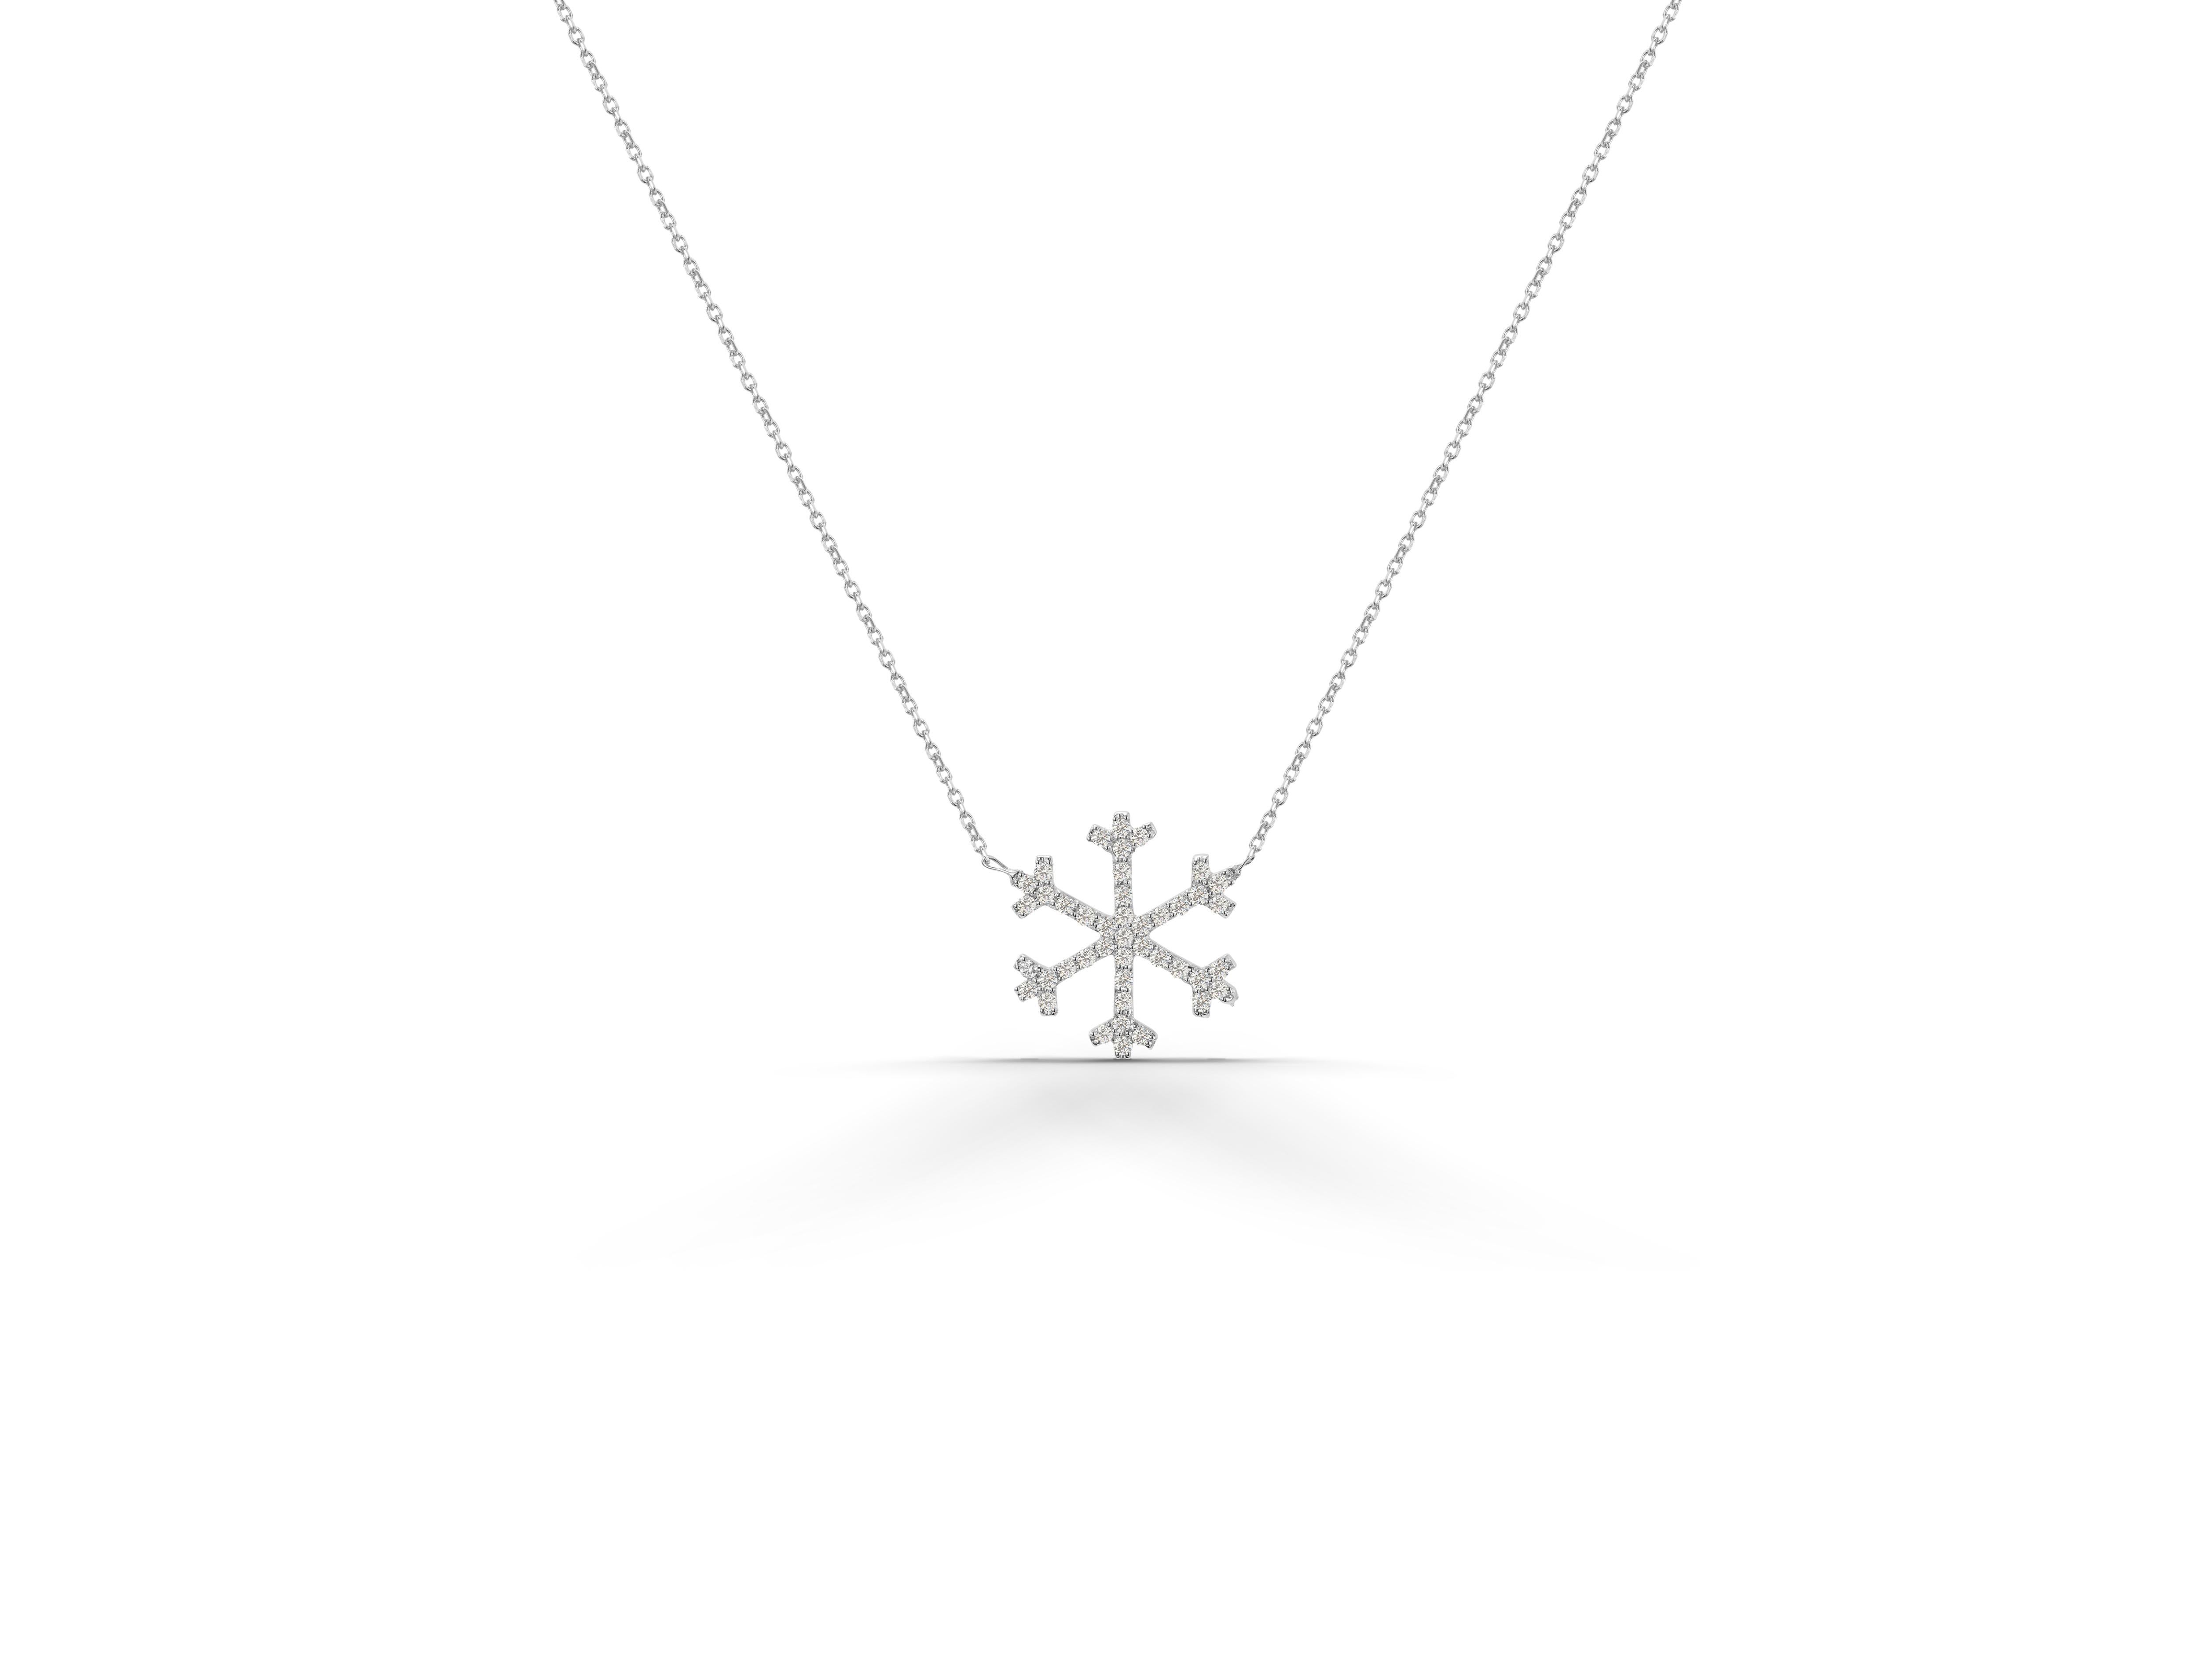 Diamond Snowflake Necklace is made of 14k solid gold.
Available in three colors of gold:  White Gold / Yellow Gold / Rose Gold.

Lightweight and gorgeous, these are a great gift for anyone on your list. Perfect for everyday wear or for those who